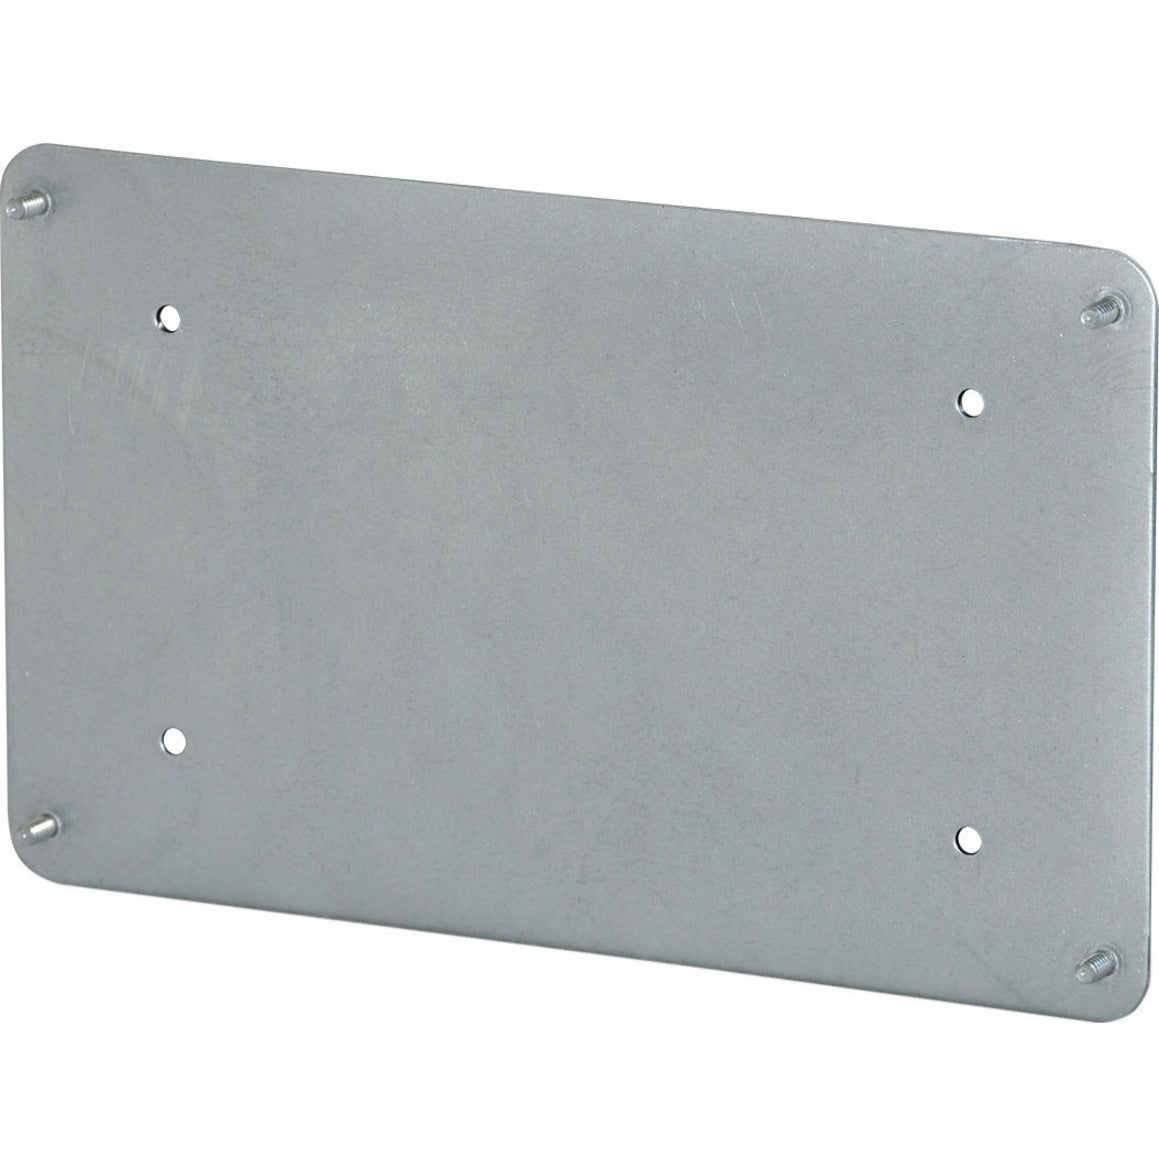 Altronix GB1 Genetec Synergis Cloud Link Adapter Plate, Mounting Plate for Backplane, Access Control System, Enclosure